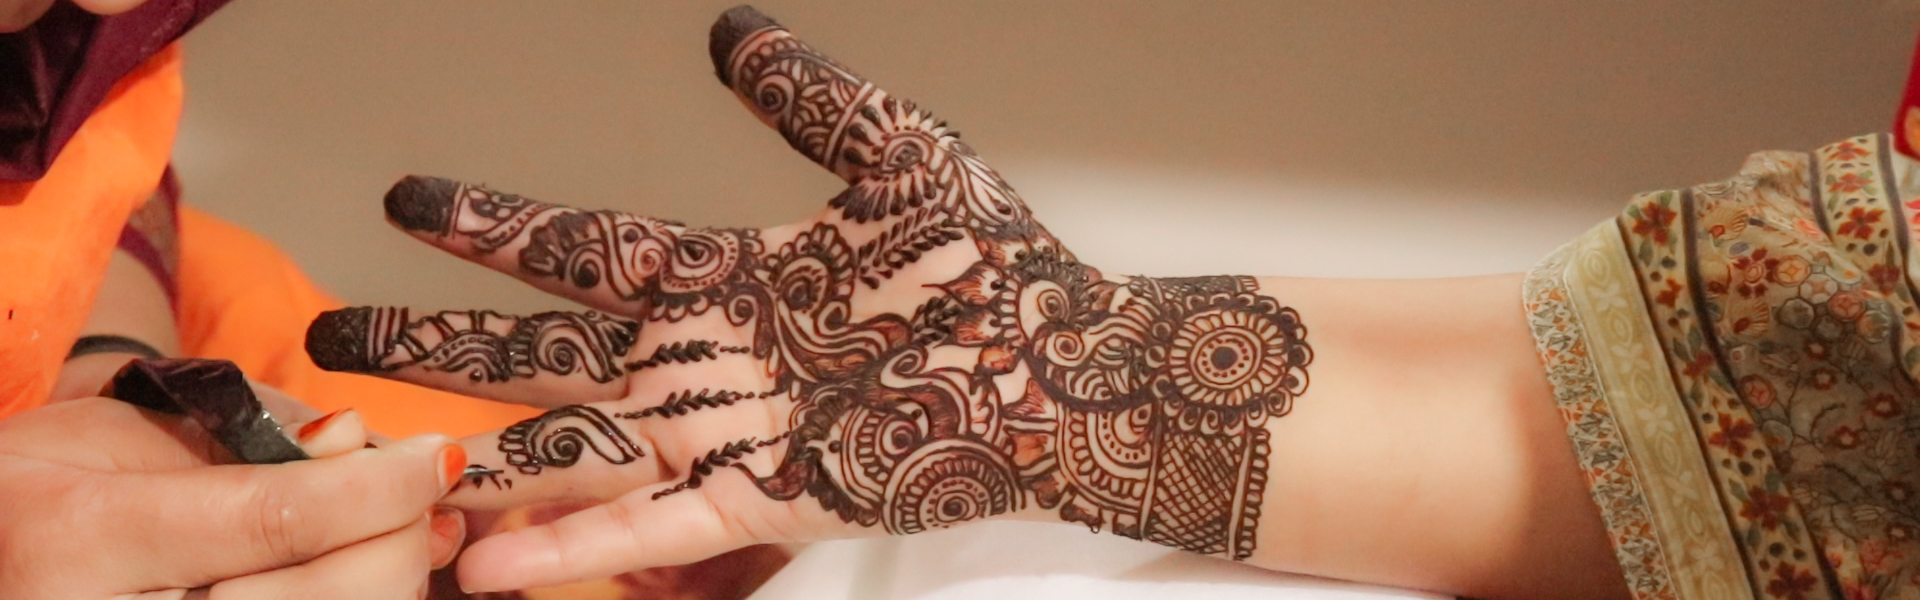 New Mehndi Designs For Hands | Arabic and Pakistani Mehndi Designs | Mehndi  Designs By Top Artist - Fashion World Hunt